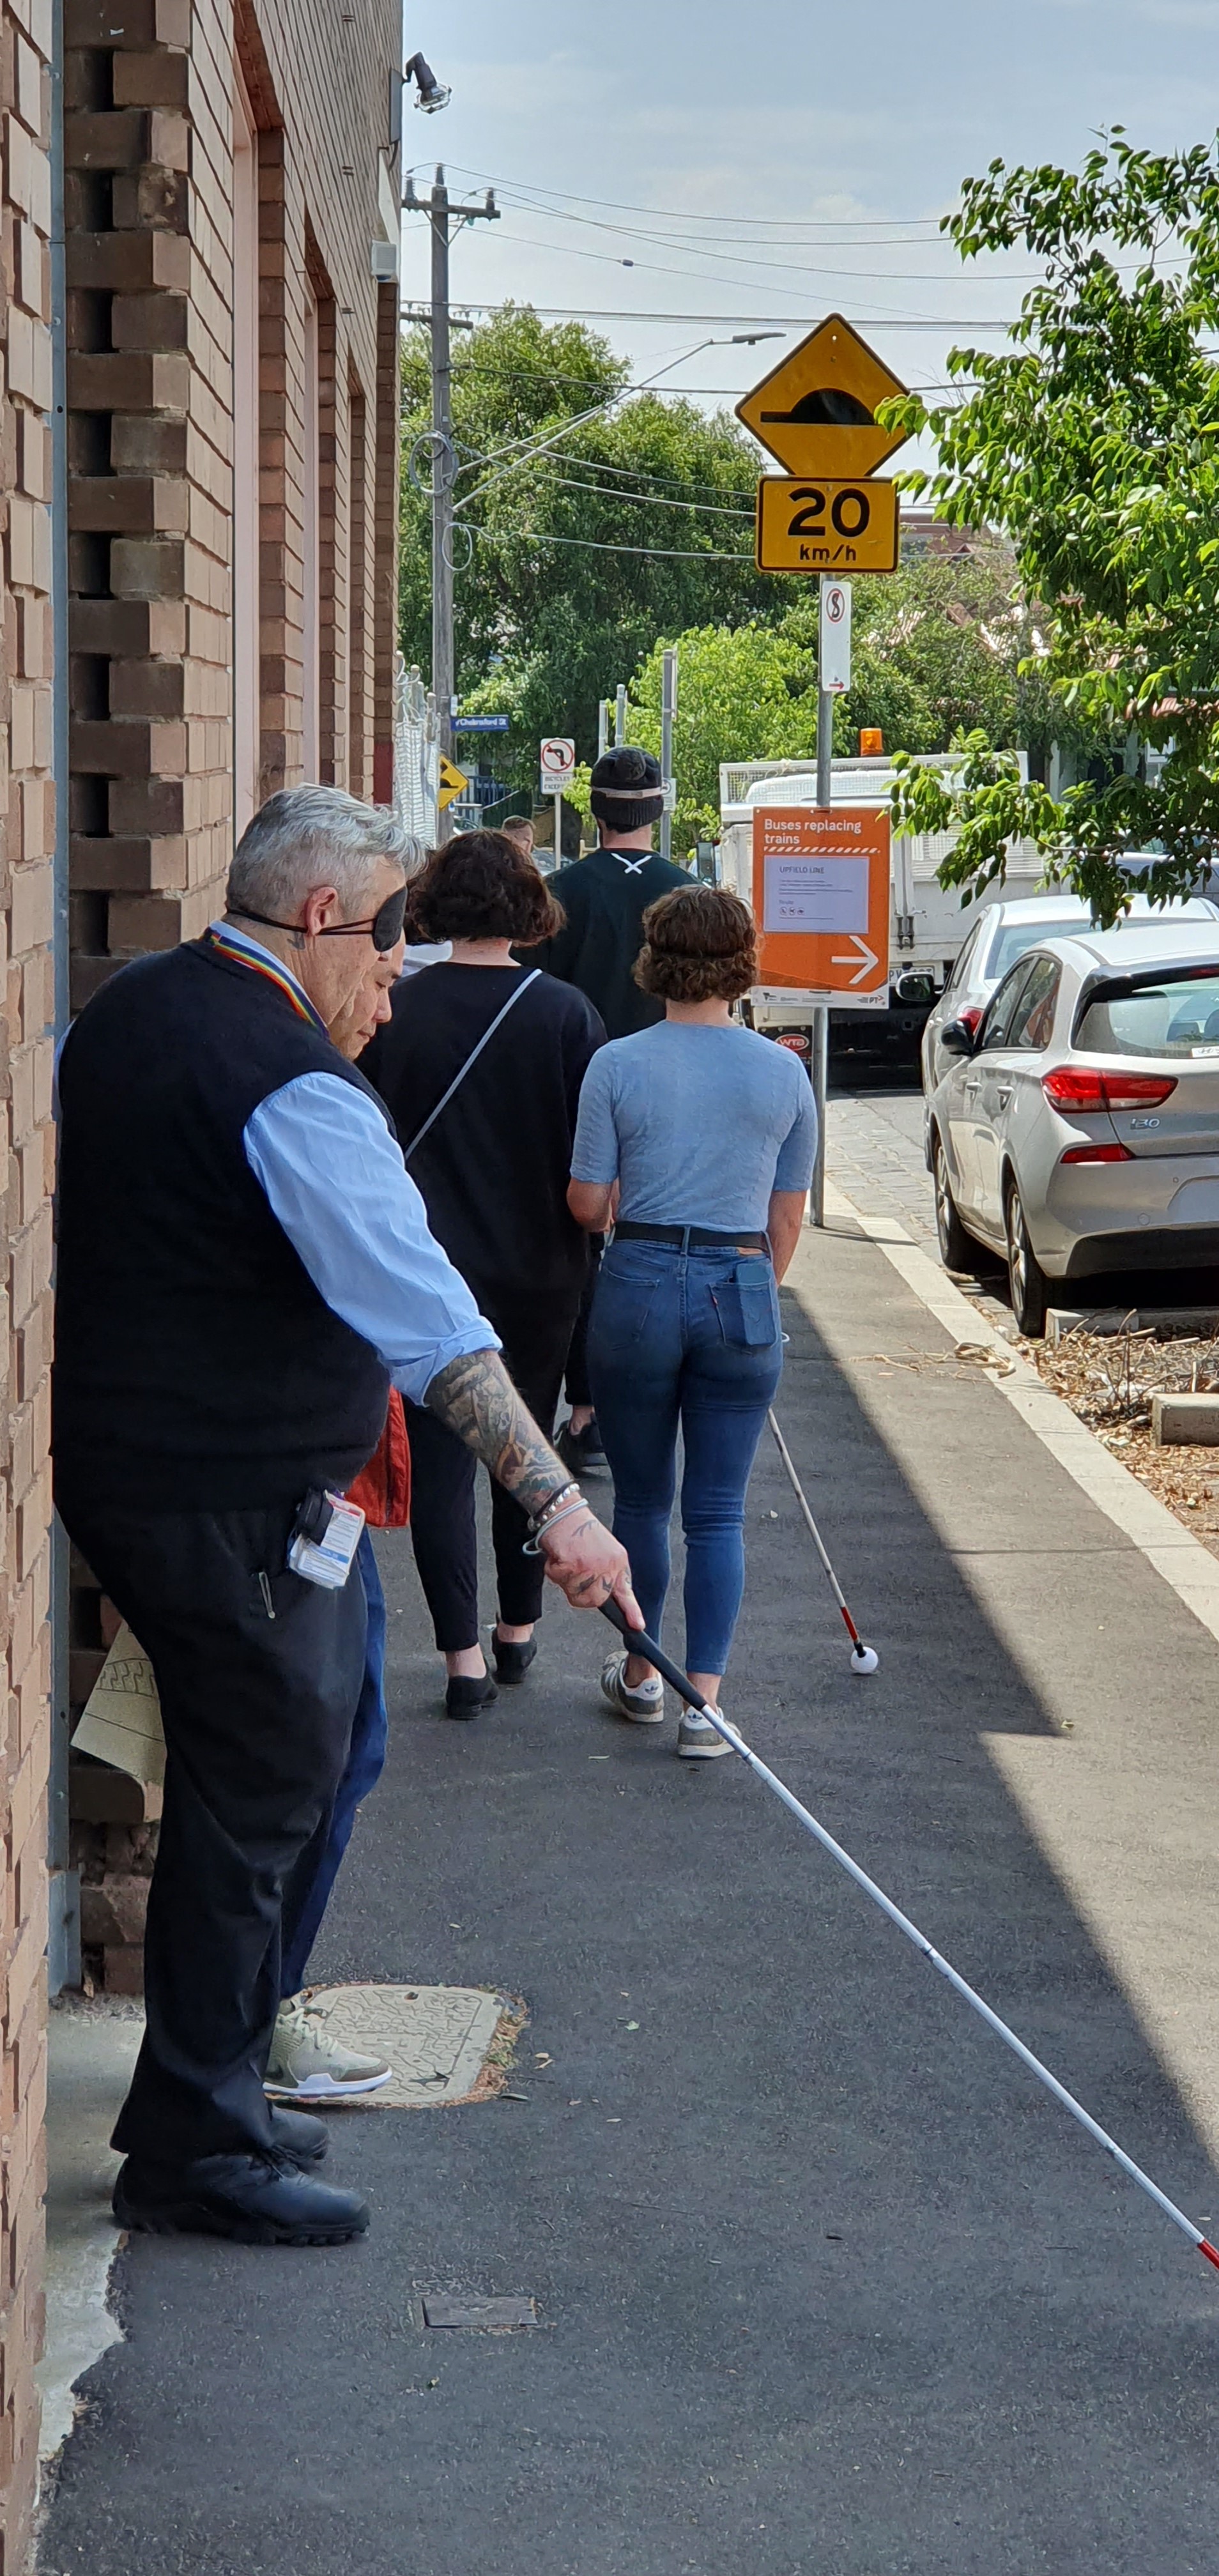 A blindfolded Metro Trains staff member uses a cane to navigate the pavement under the guide of another staff member.